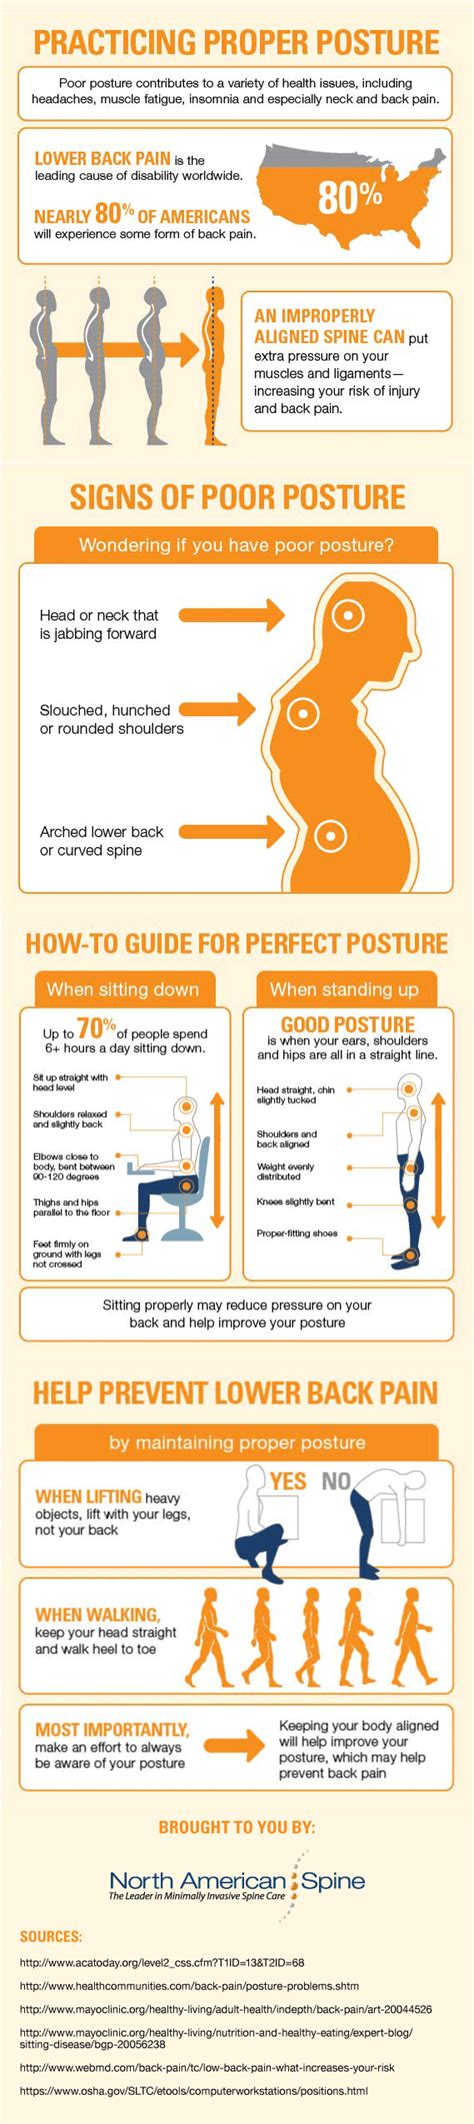 Practicing Proper Posture Infographic Poor Posture Not Only Affects